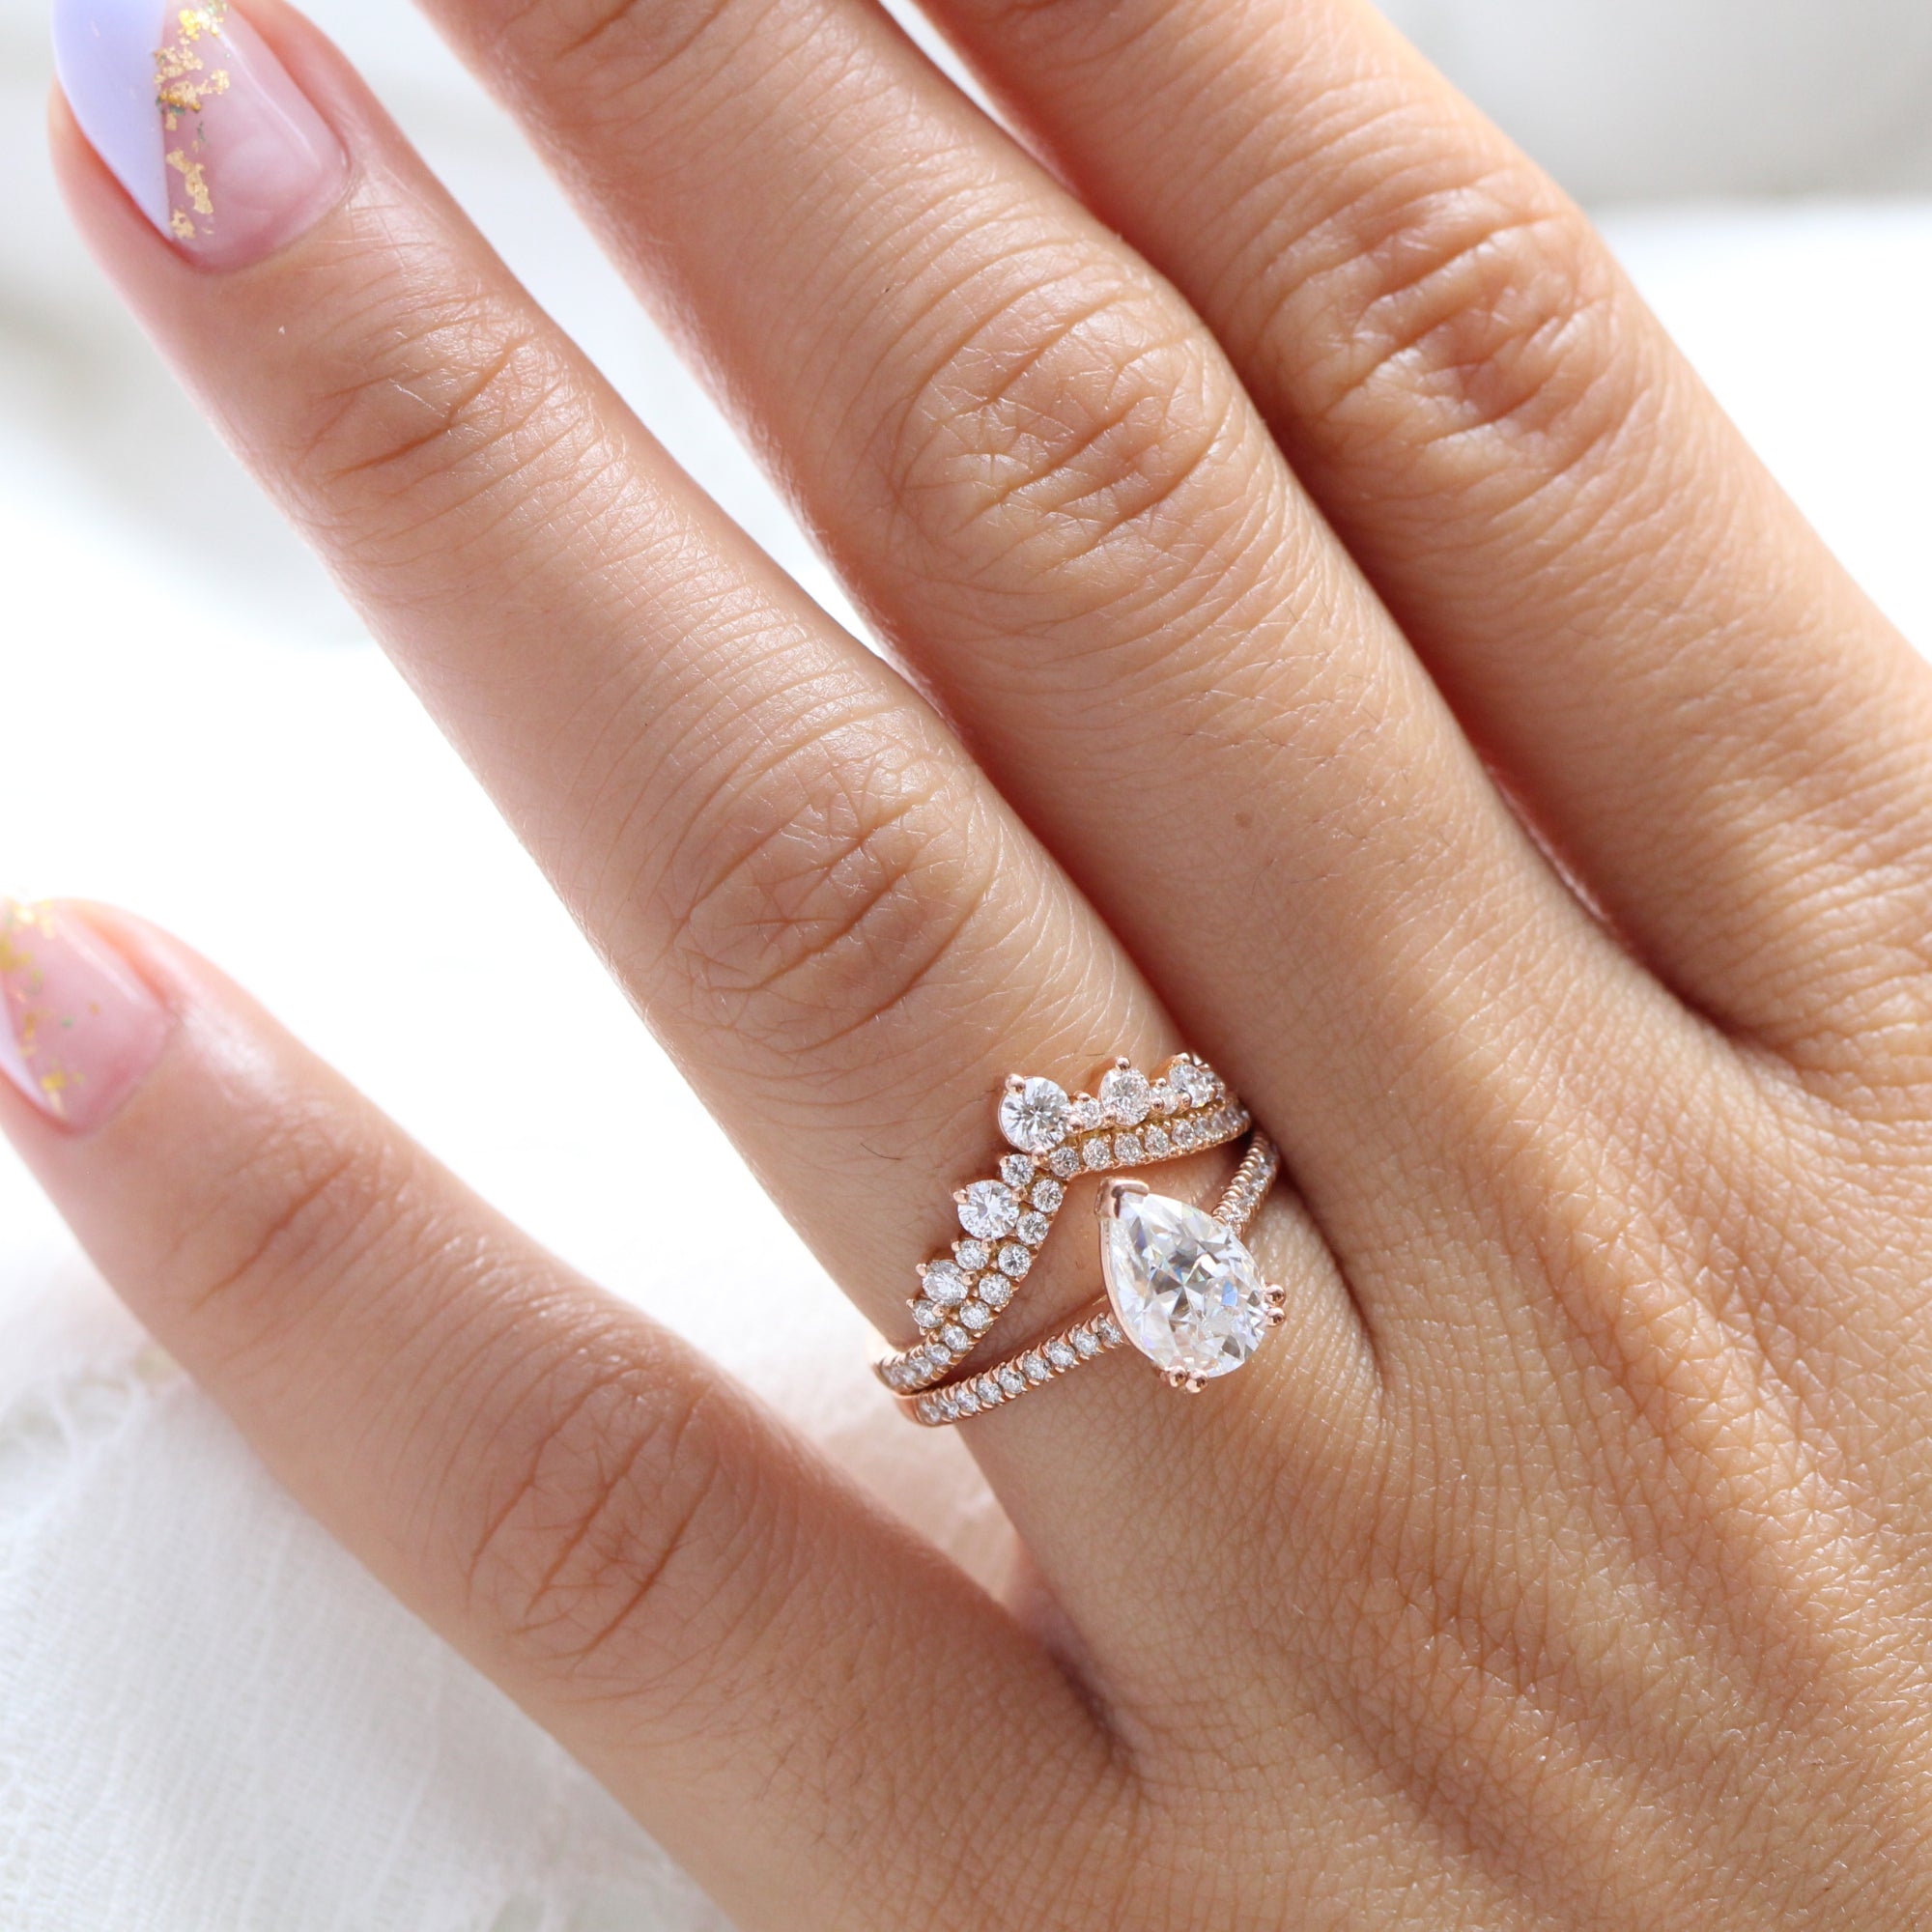 Pear moissanite solitaire ring rose gold large diamond wedding ring set la more design jewelry